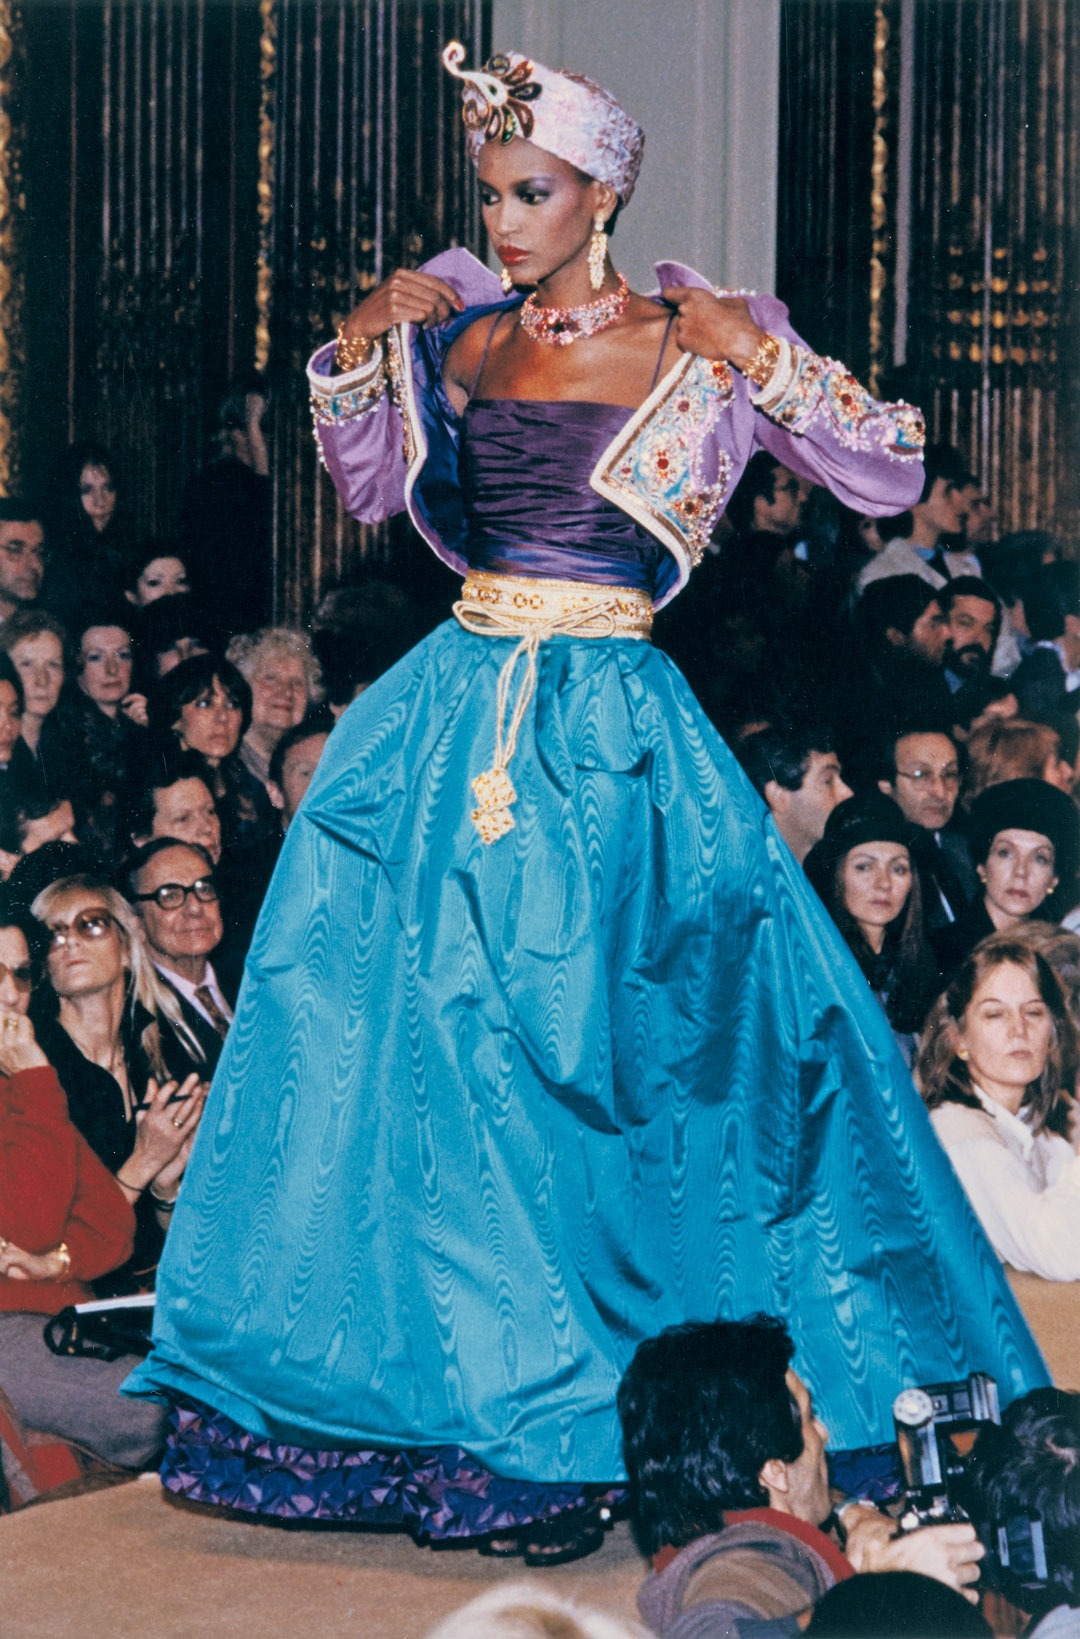 Pleated lamé turban ornamented with a sequined palm leaf created by Nina Wood, gold braid belt embroidered with pearls (made by Leroux), worn with an Indian-inspired evening outfit, Spring/Summer 1982 haute couture collection. © Fondation Pierre Bergé – Yves Saint Laurent, Paris/All Rights Reserved